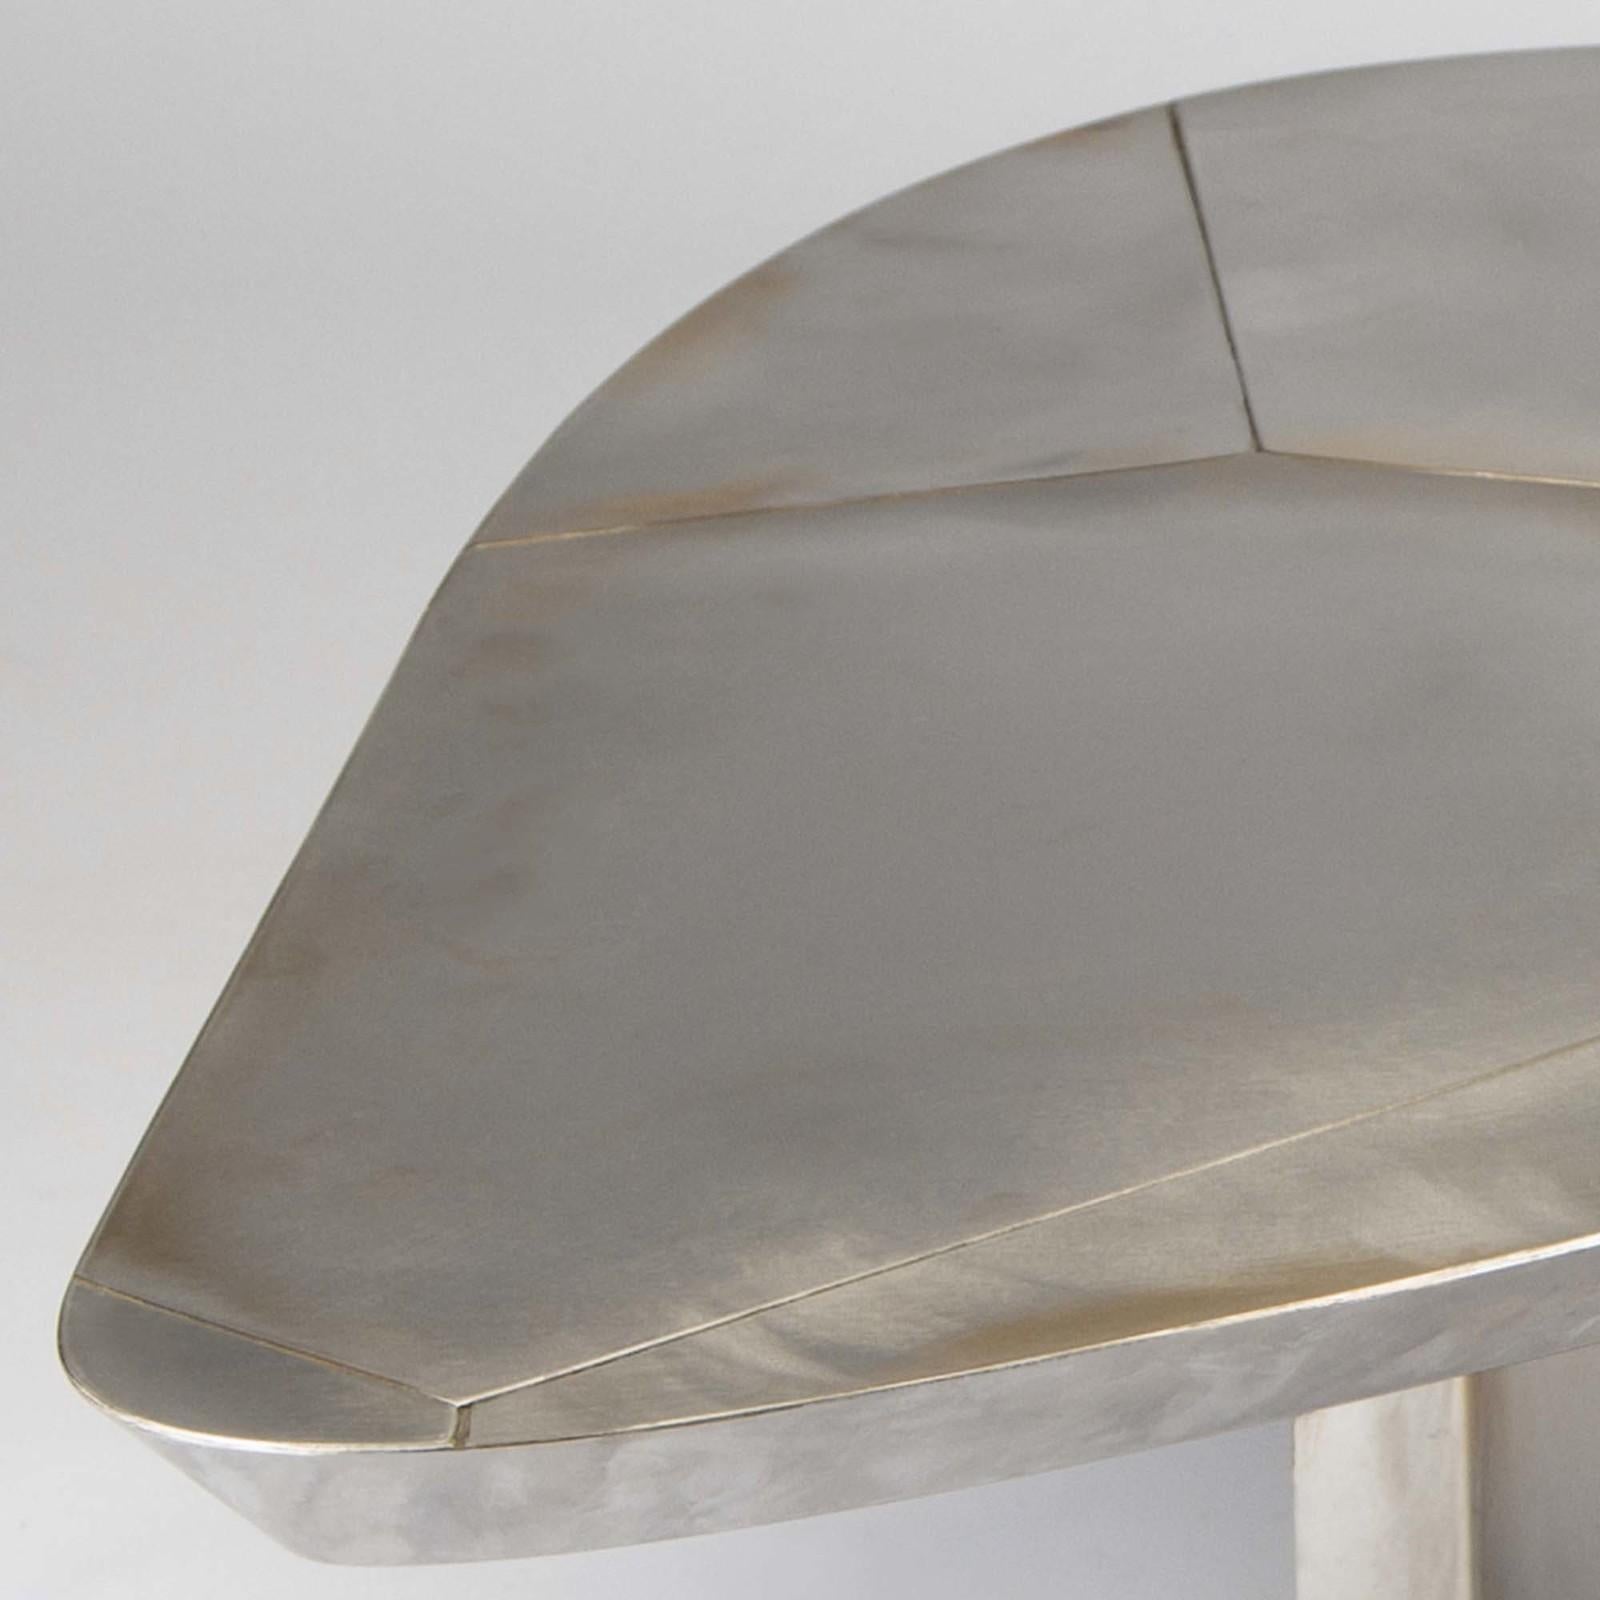 This unique and sophisticated coffee table is part of the Thinking Klein collection, inspired by the work of French artist Yves Klein. It was crafted entirely of steel with a multifaceted base that supports a strikingly textured top with an